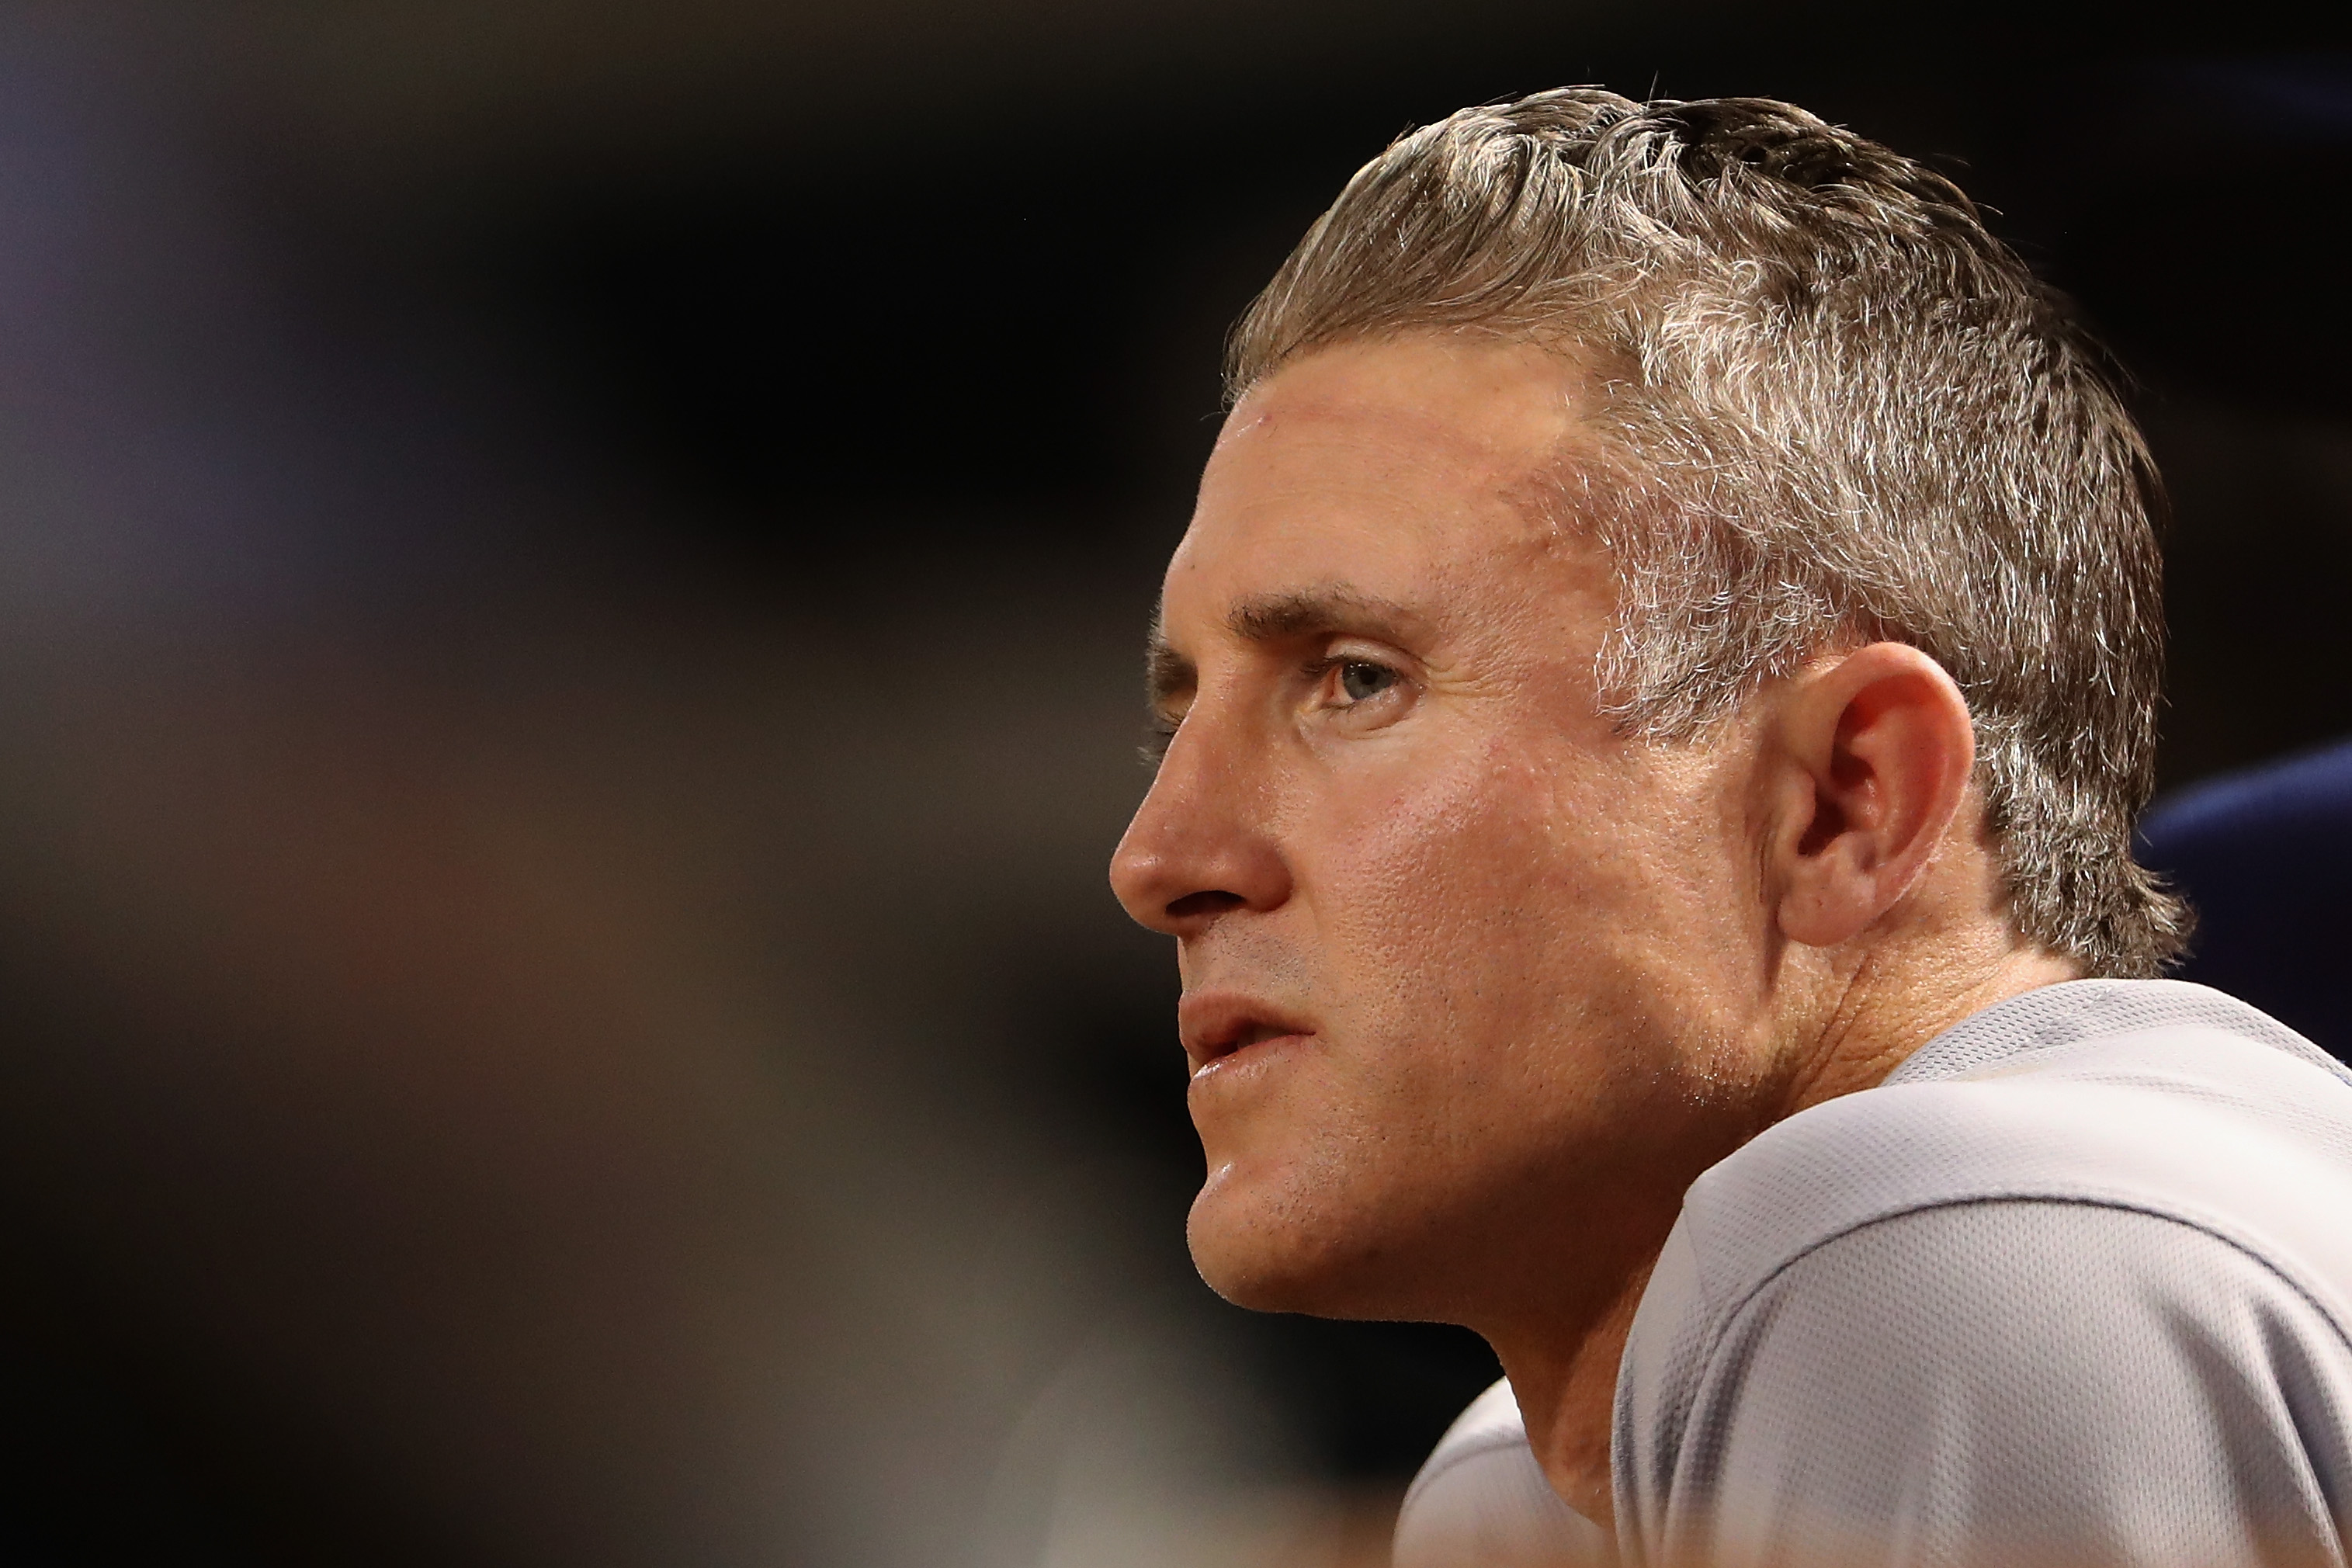 Is Chase Utley a Hall of Famer?